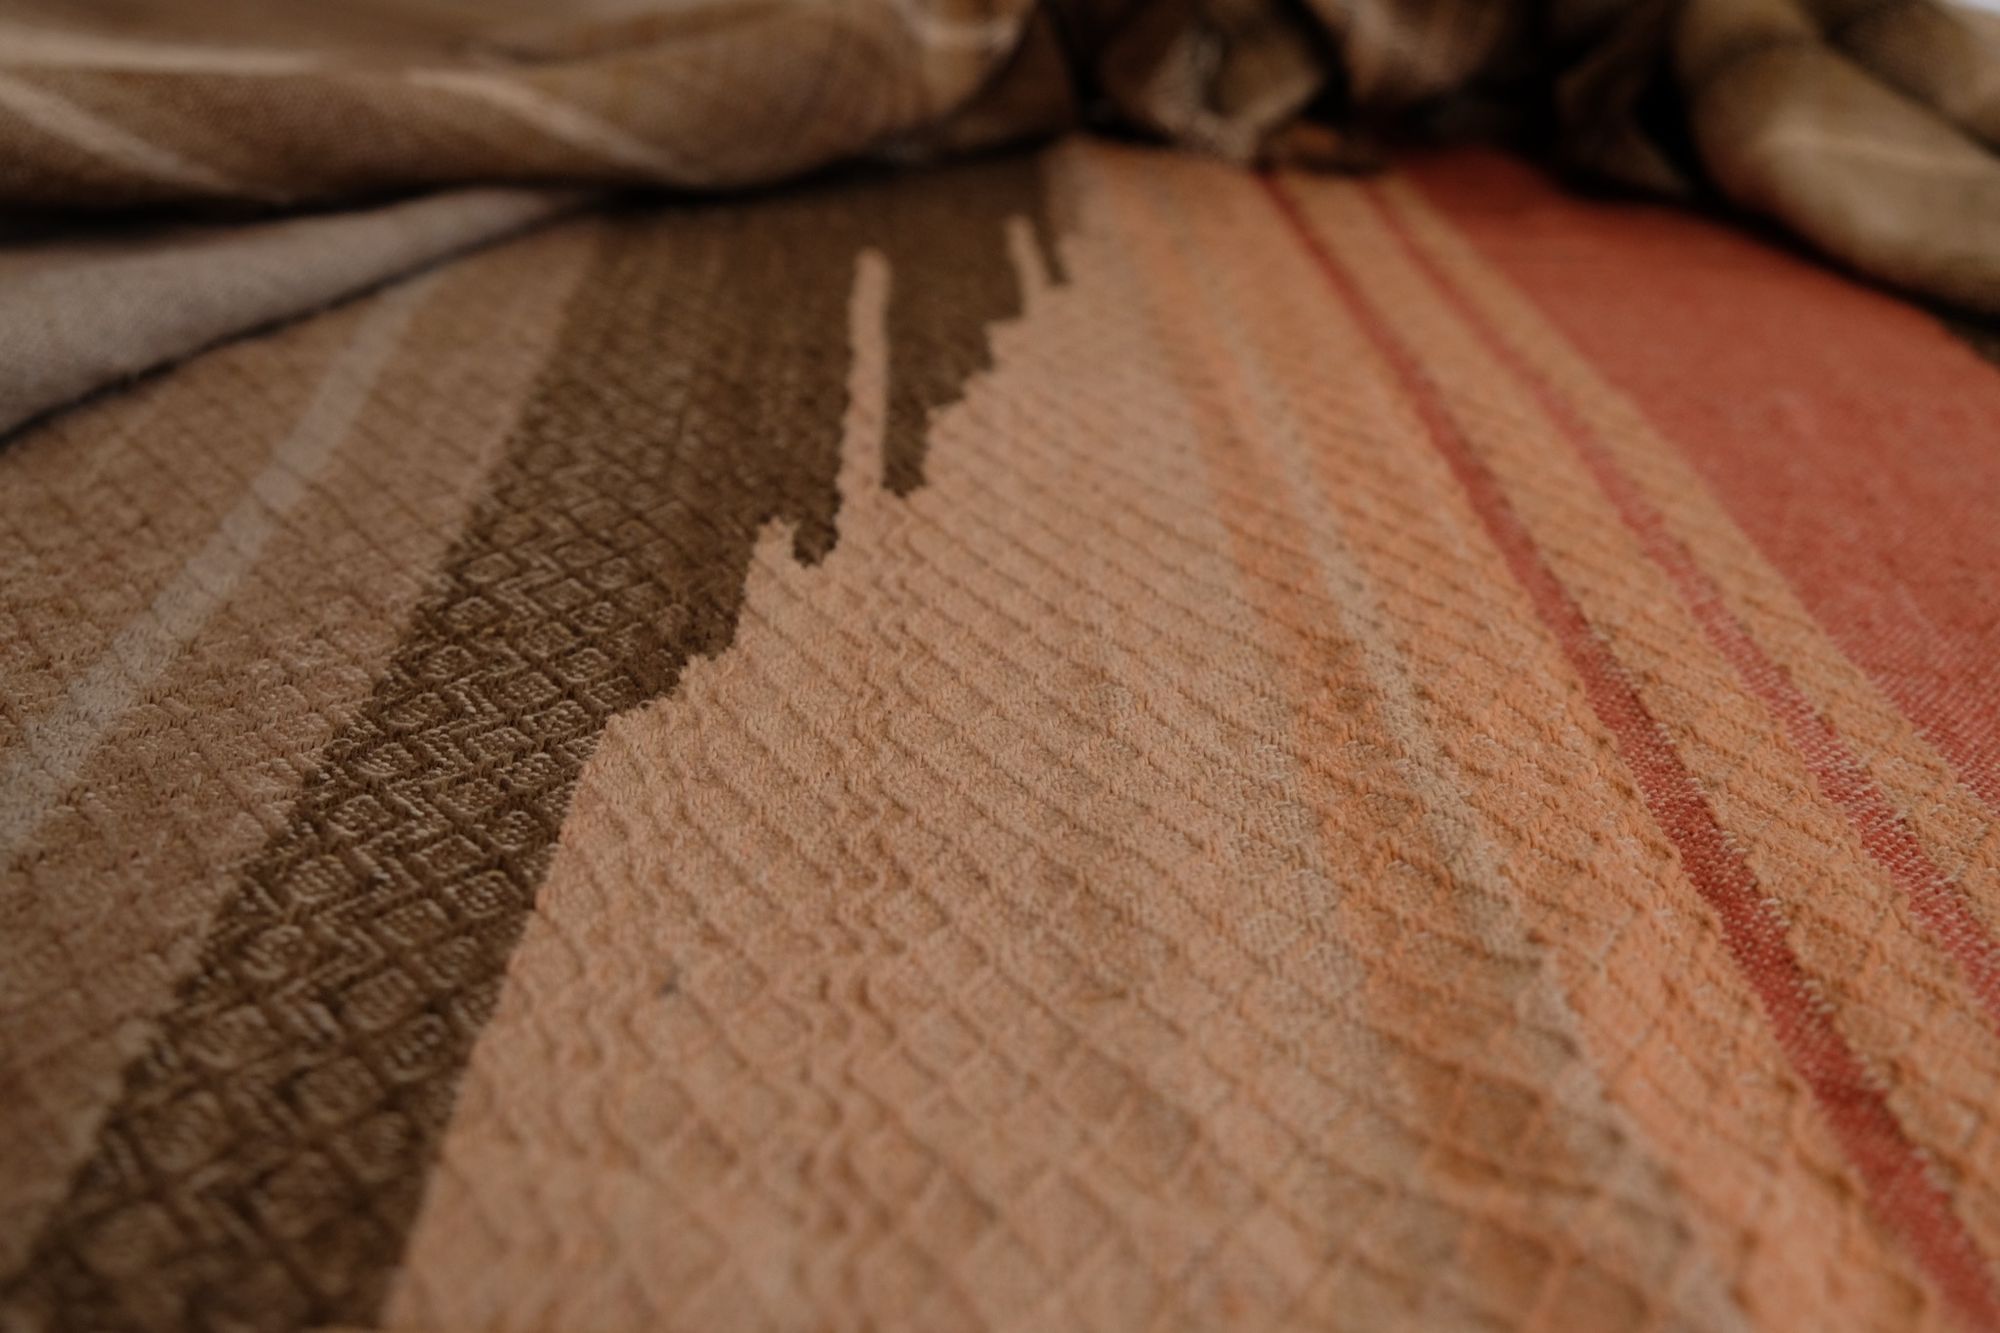 Detail of Handwoven shawl in brown, tan and salmon pink colors laying on a wood floor. 